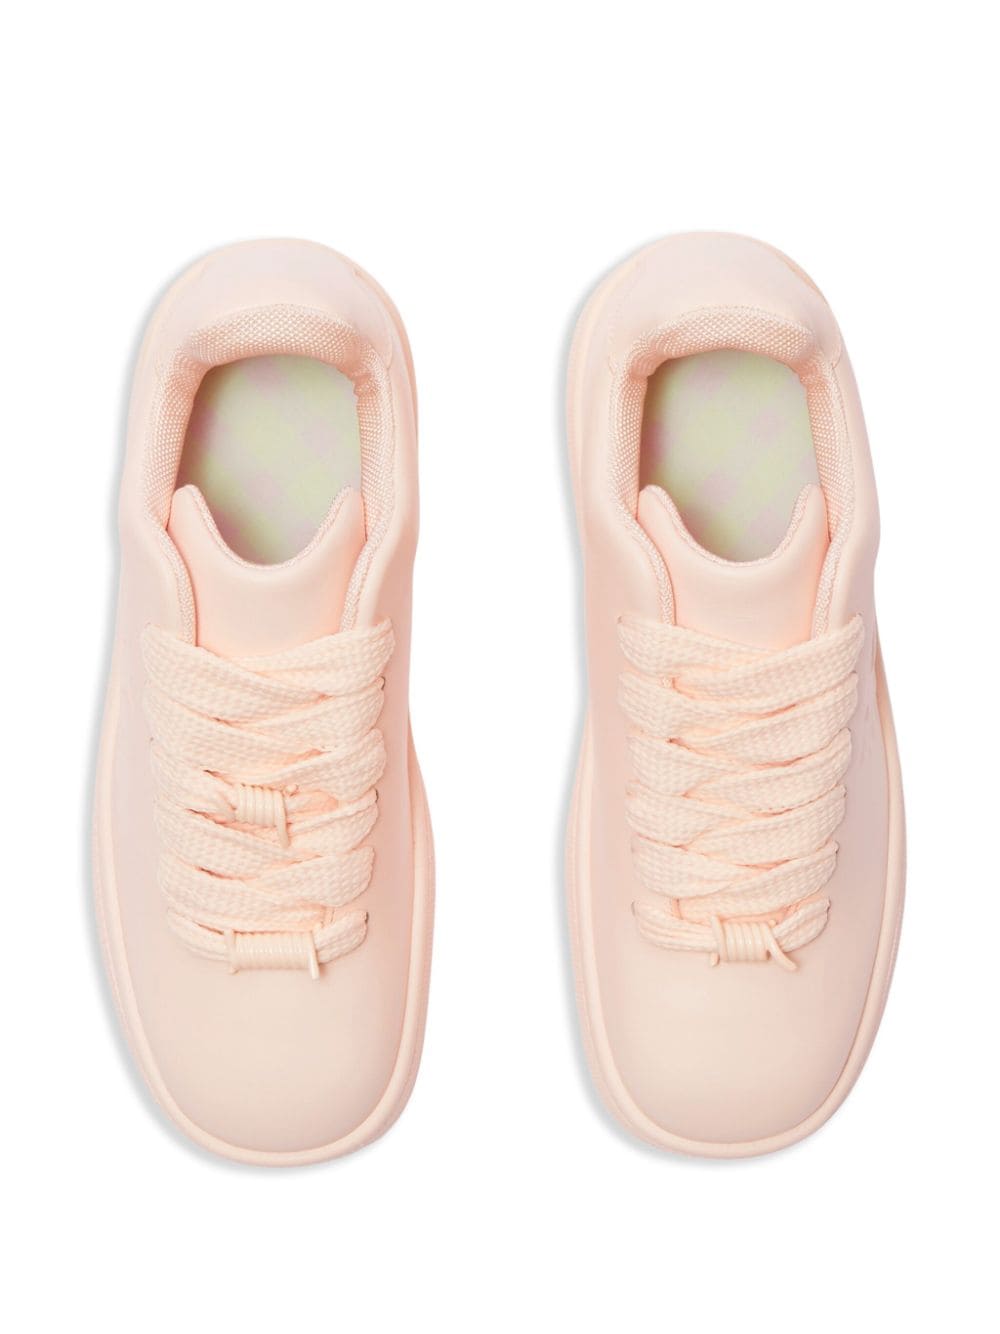 Burberry Sneakers Pink